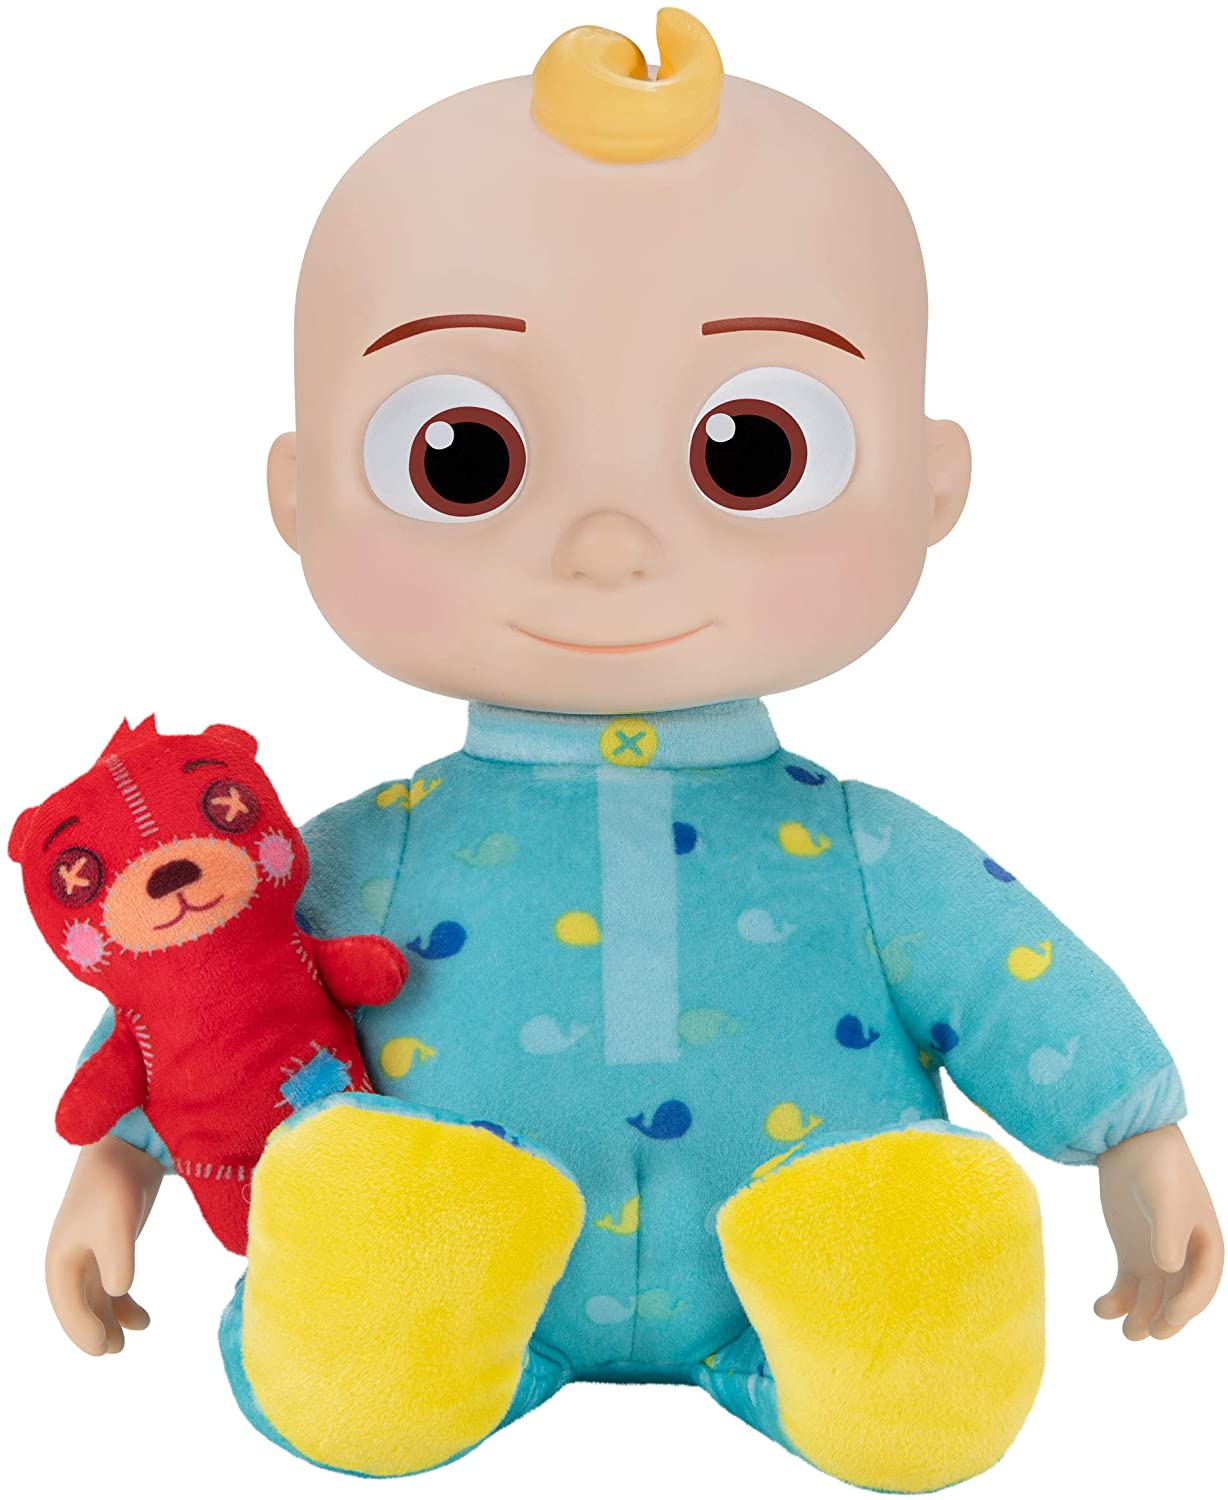 CoComelon Musical Bedtime JJ Plush Doll w/ Sounds & Phrases $10.79 + Free Shipping w/ Prime or free on $25+ orders